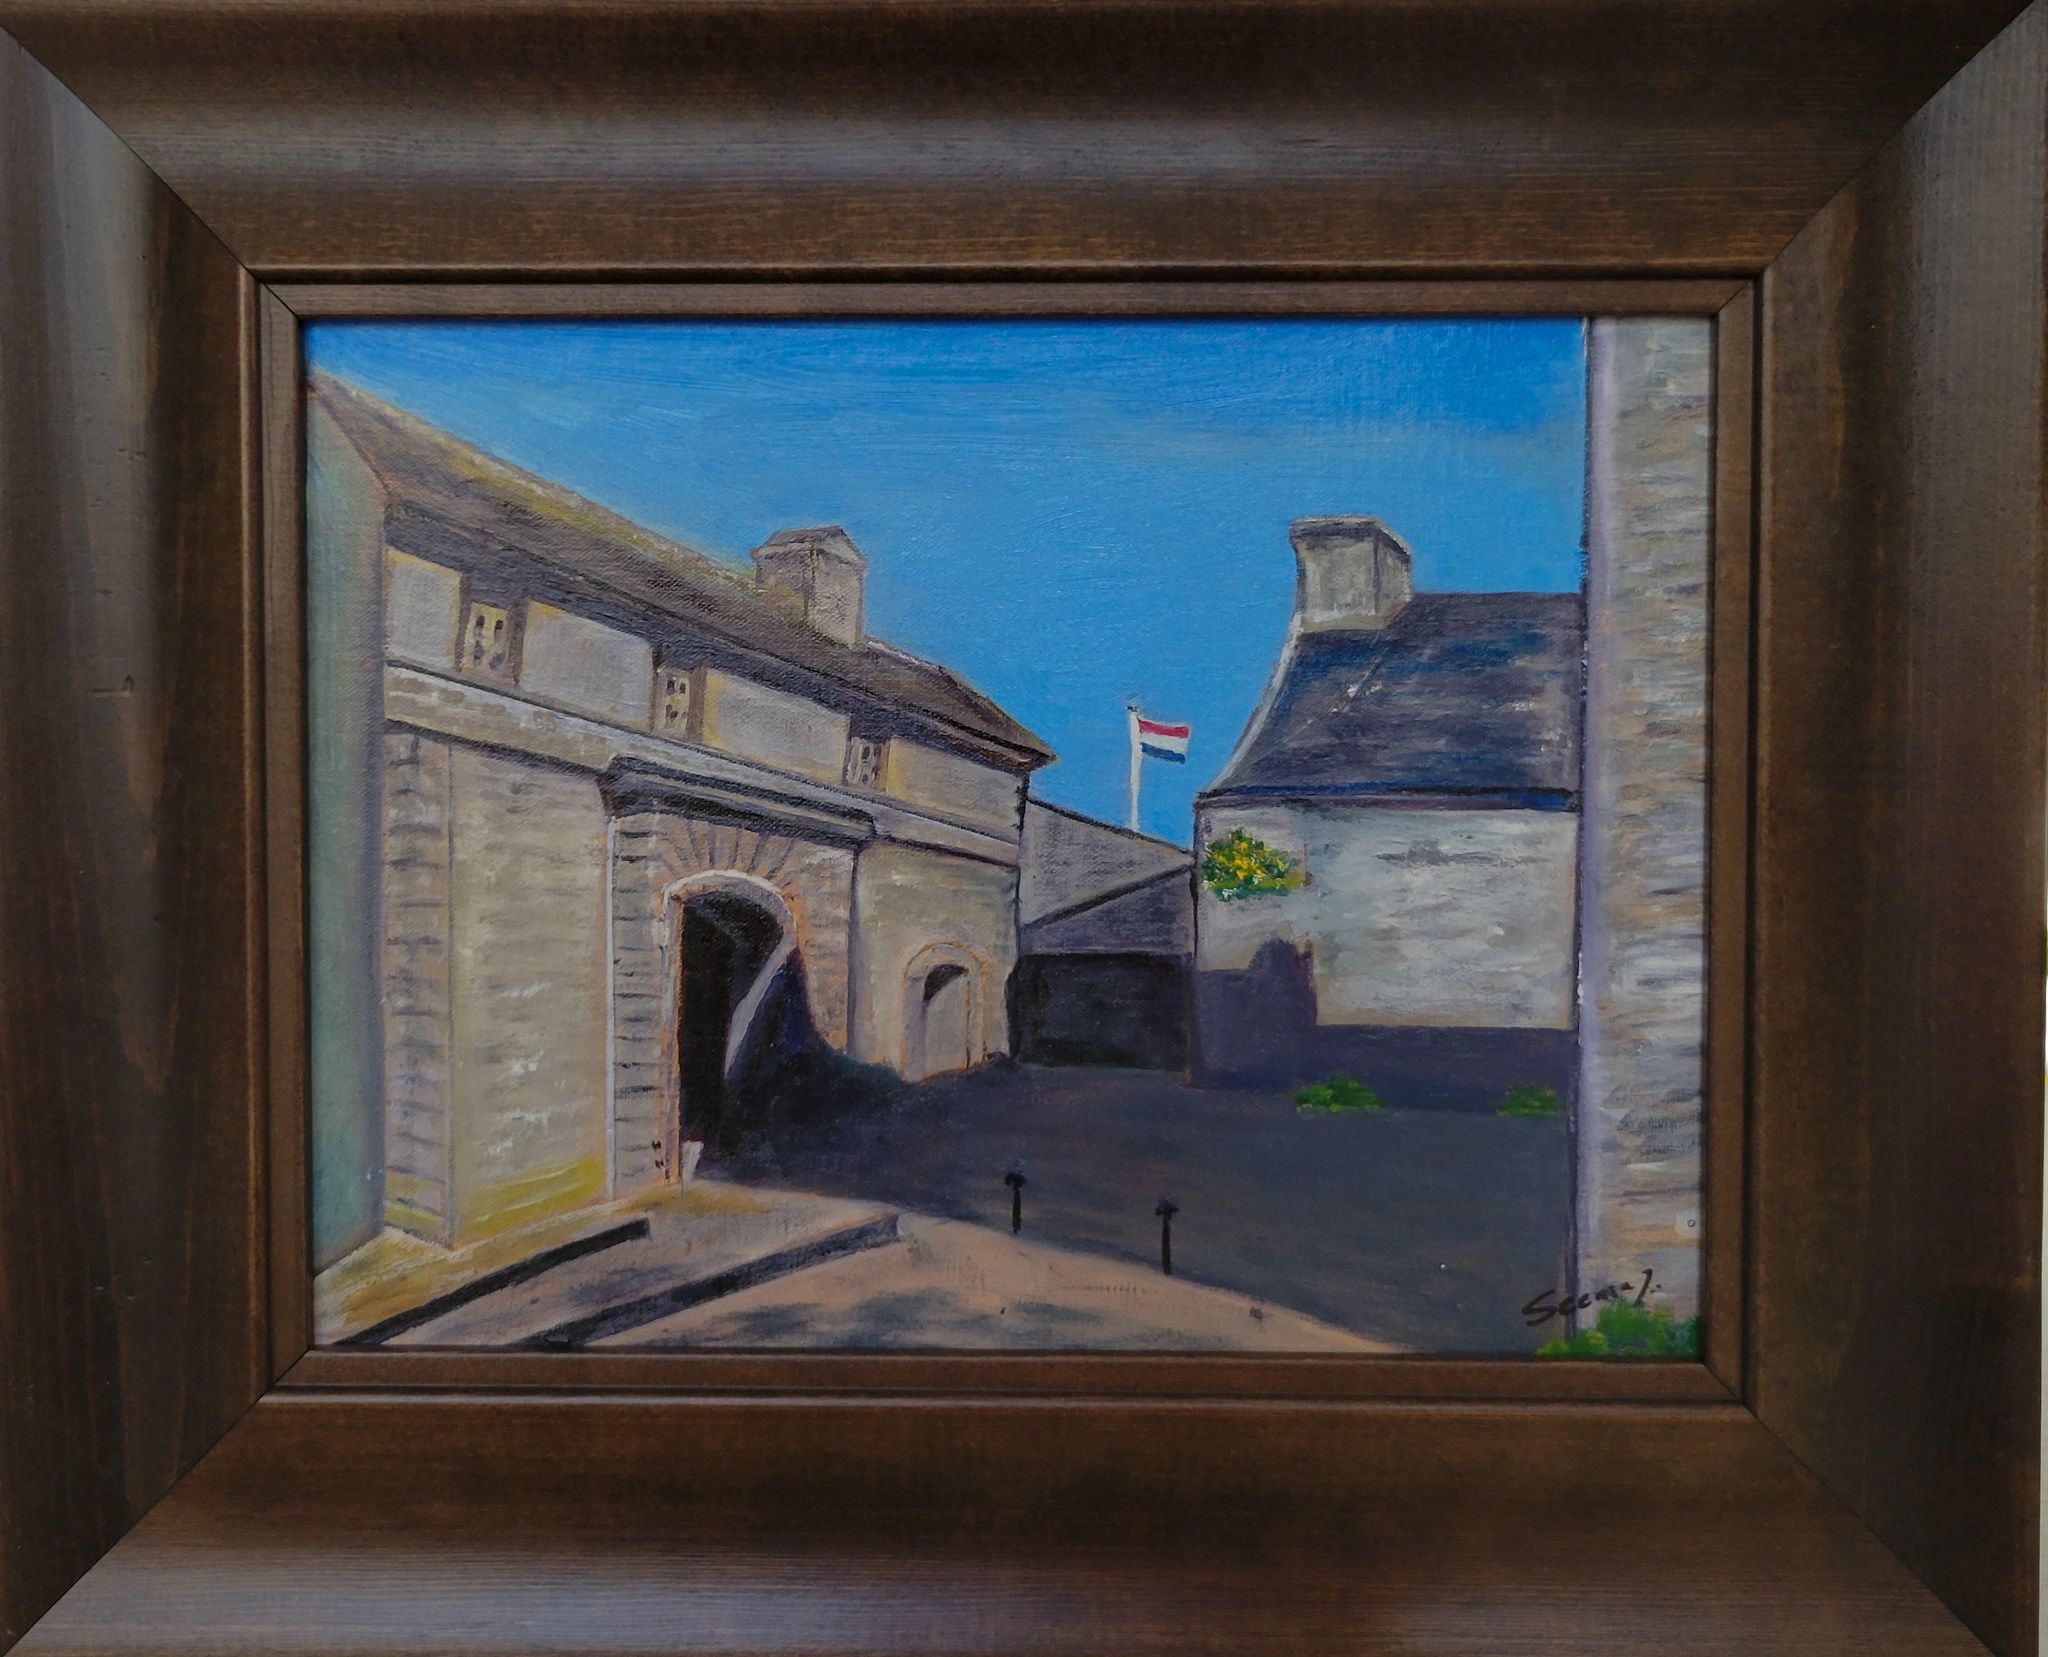 French countryside - Concoran, France; Oil on canvas; Framed 14 H x 17 W inches; Price = $400 (Sold 